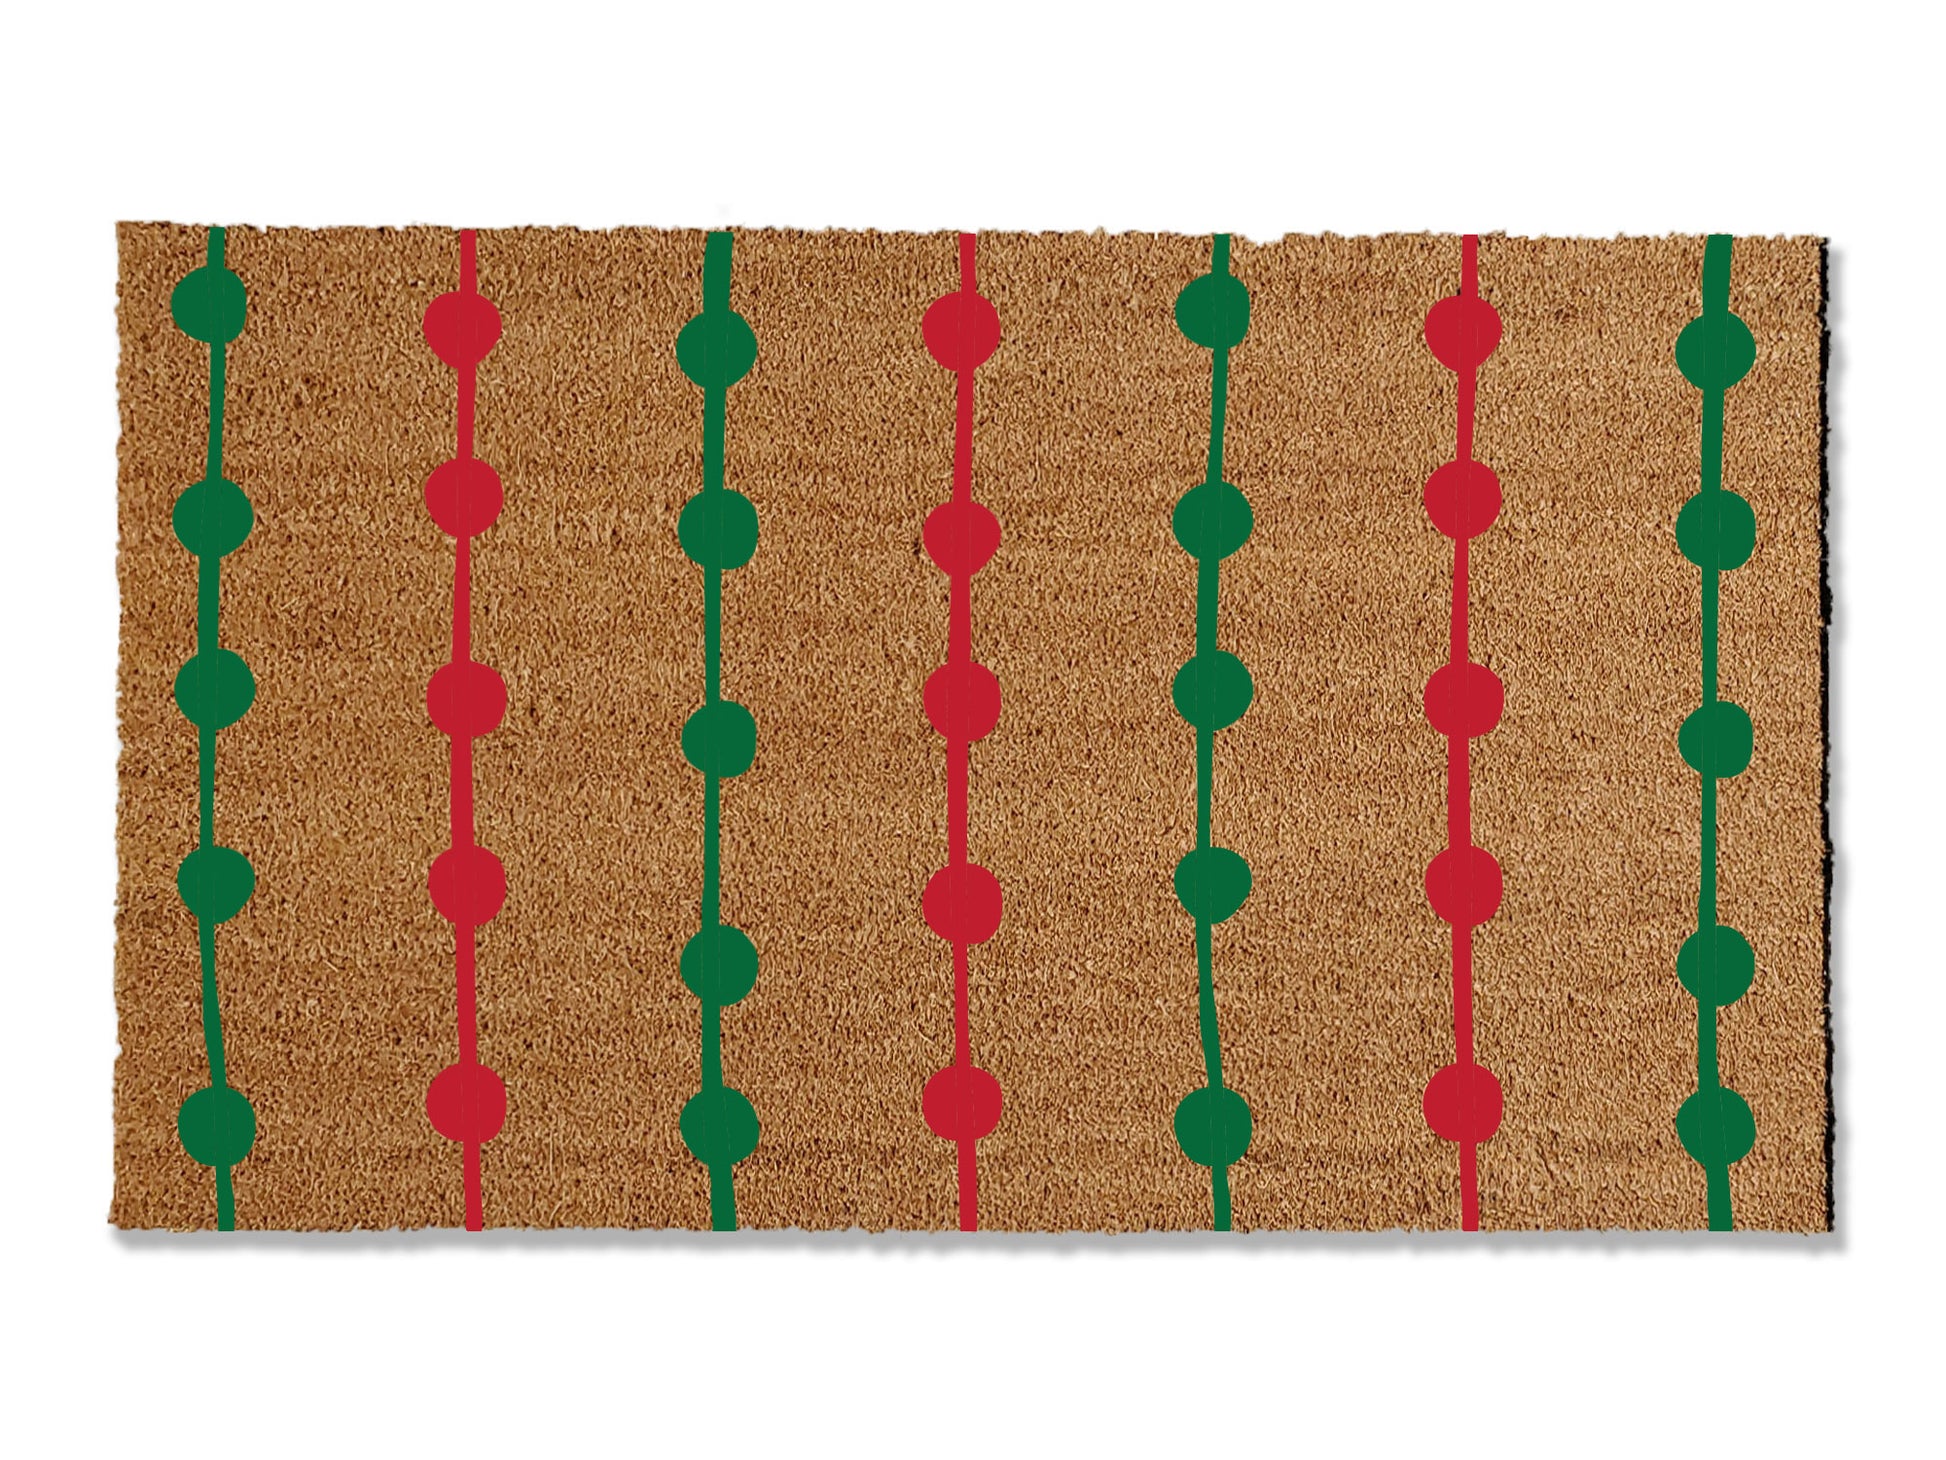 1/2 inch thick coir doormat adorned with festive strings of red and green Christmas lights. Perfect for elevating your entryway this holiday season, this decorative mat not only adds holidaycharm but is also highly effective at trapping dirt, ensuring a festive and tidy welcome."